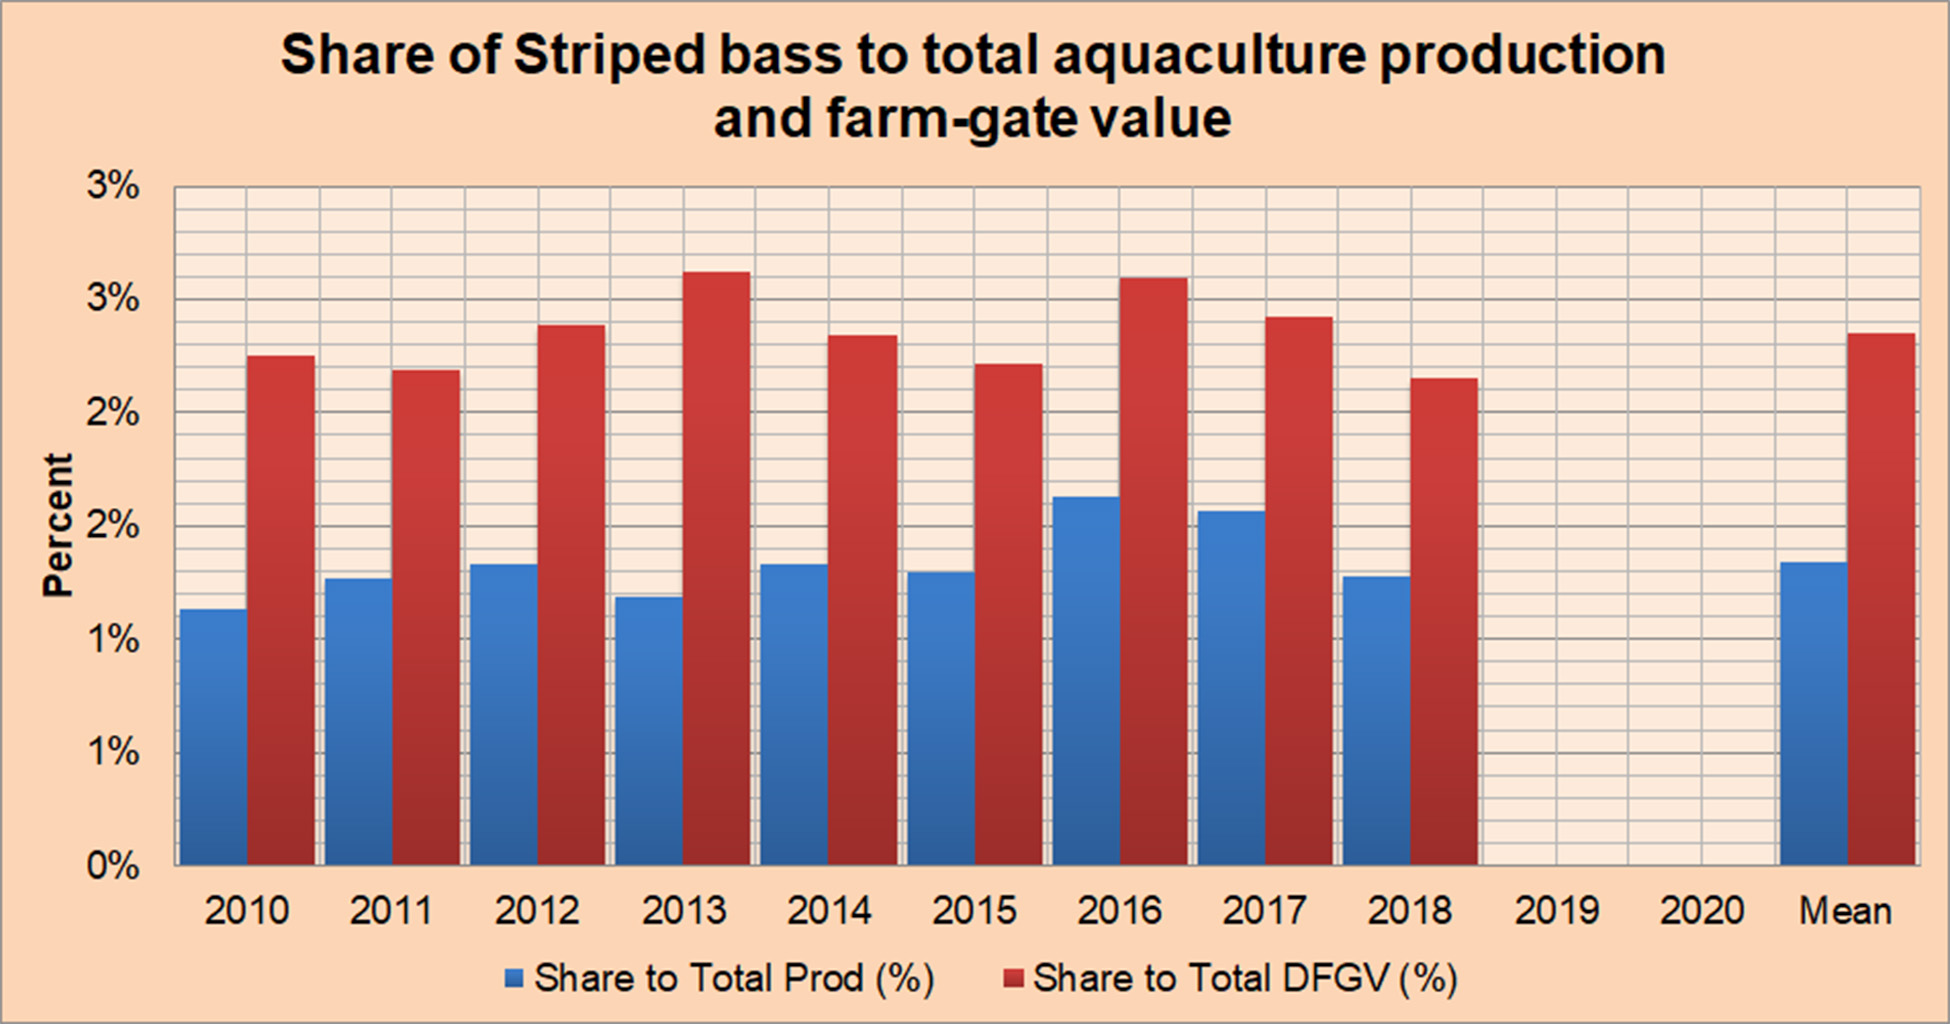 Share of Striped Bass to Total Aquaculture Production